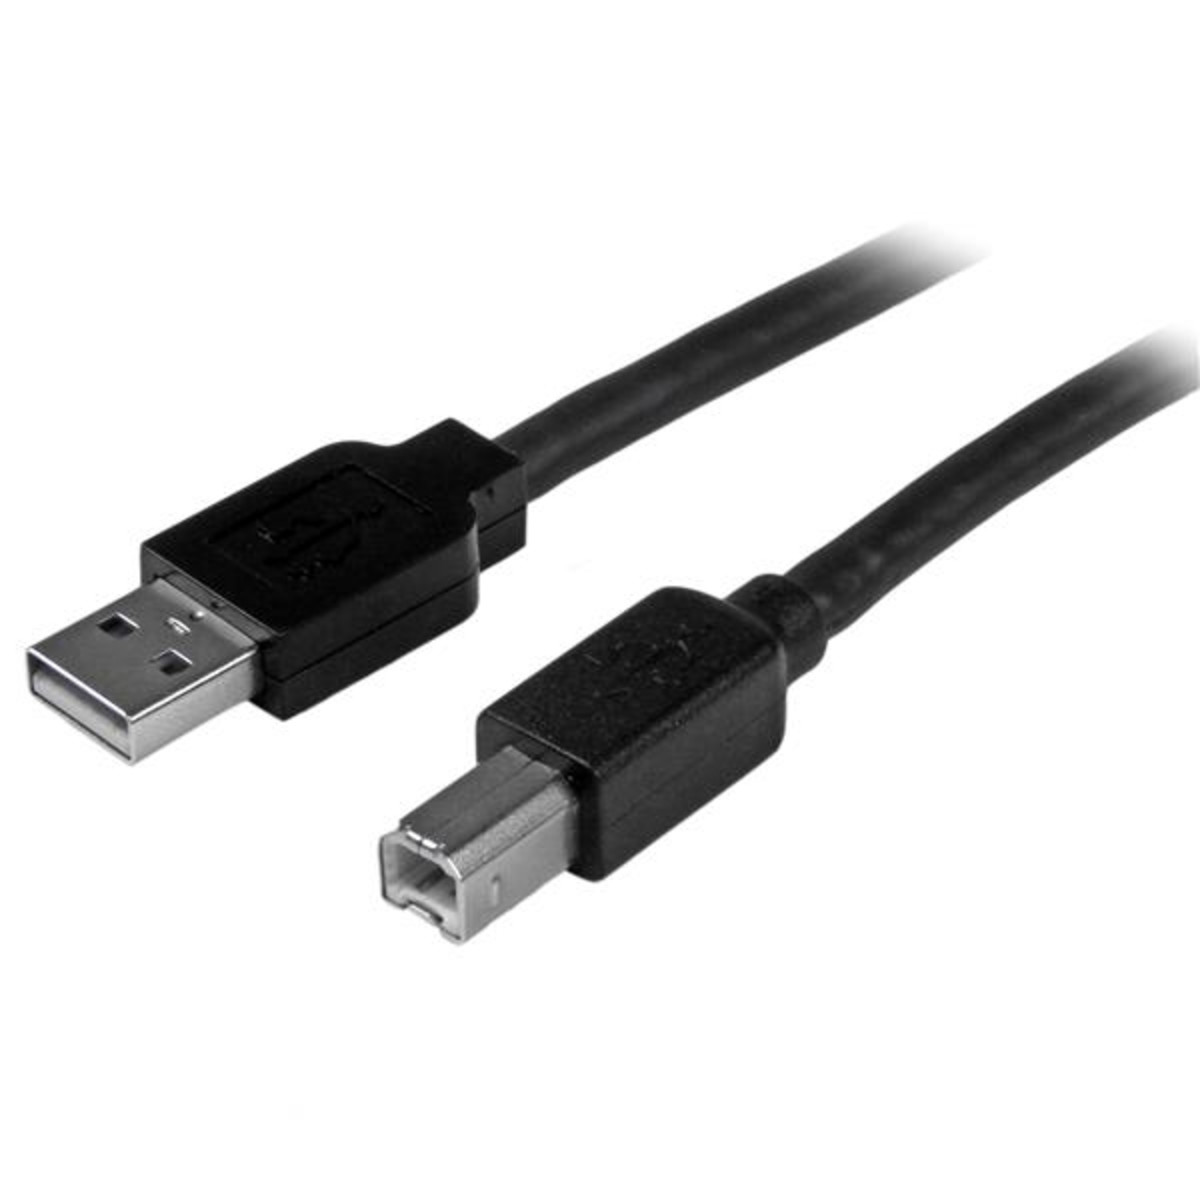 15m Active USB 2.0 A to B Cable